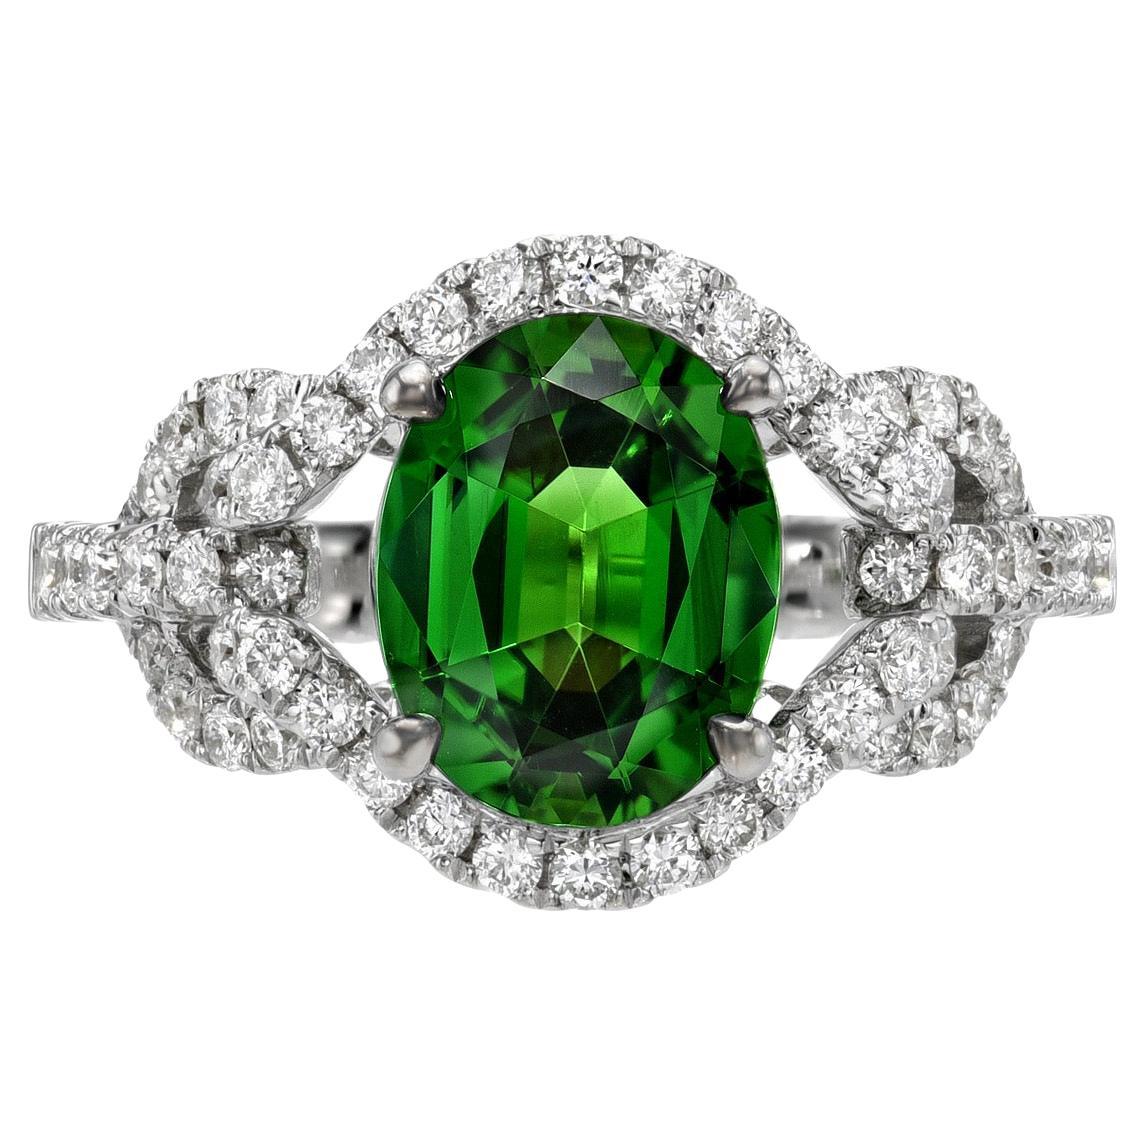 Green Chrome Tourmaline Ring 1.86 Carat Oval For Sale